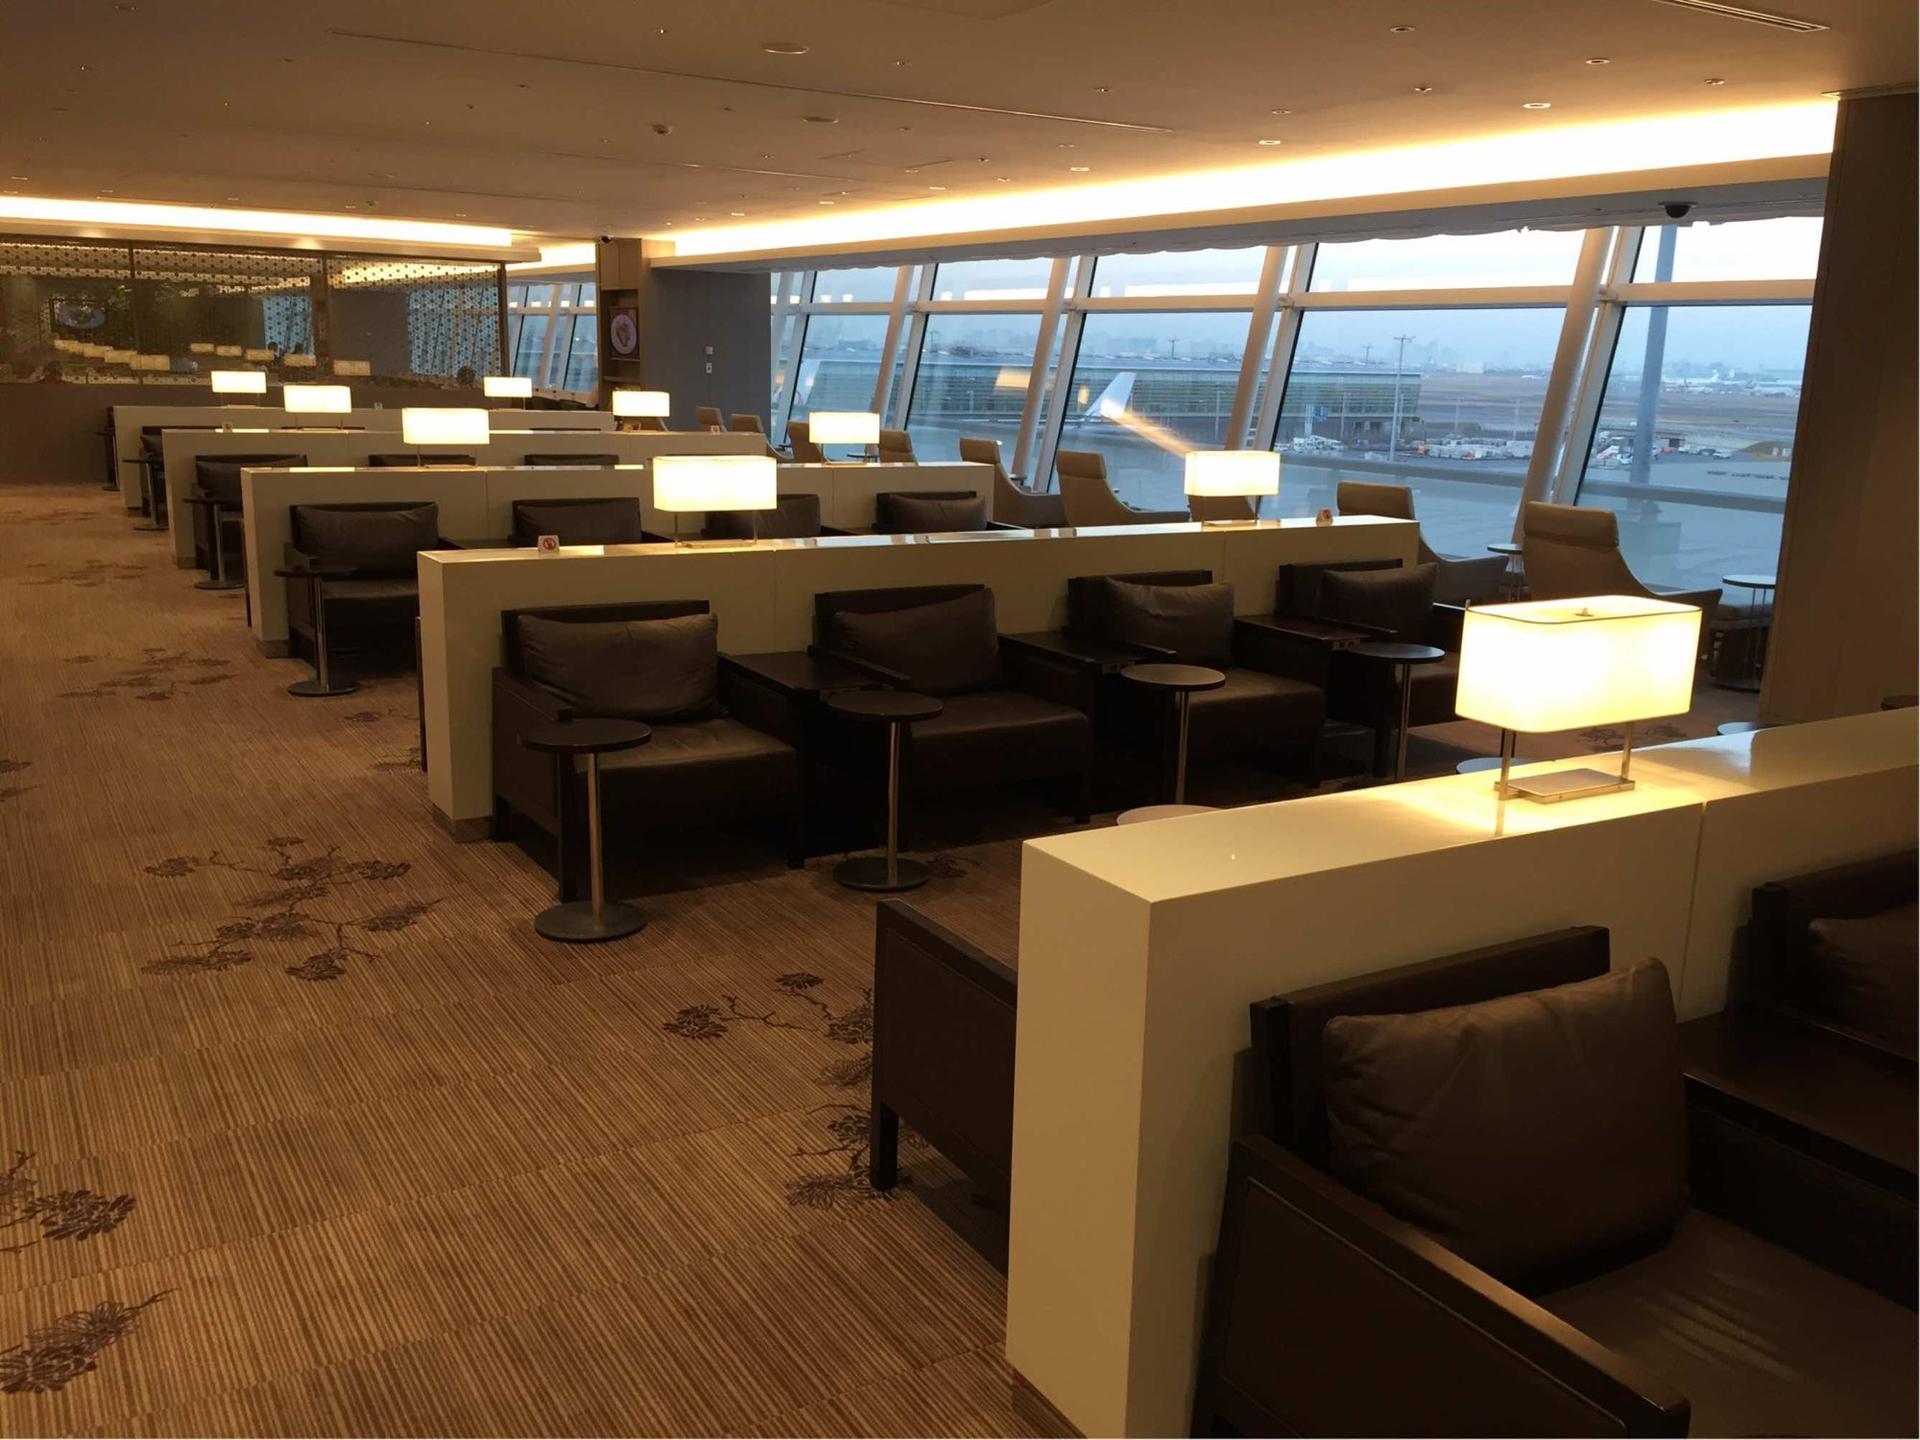 Japan Airlines JAL First Class Lounge image 13 of 43